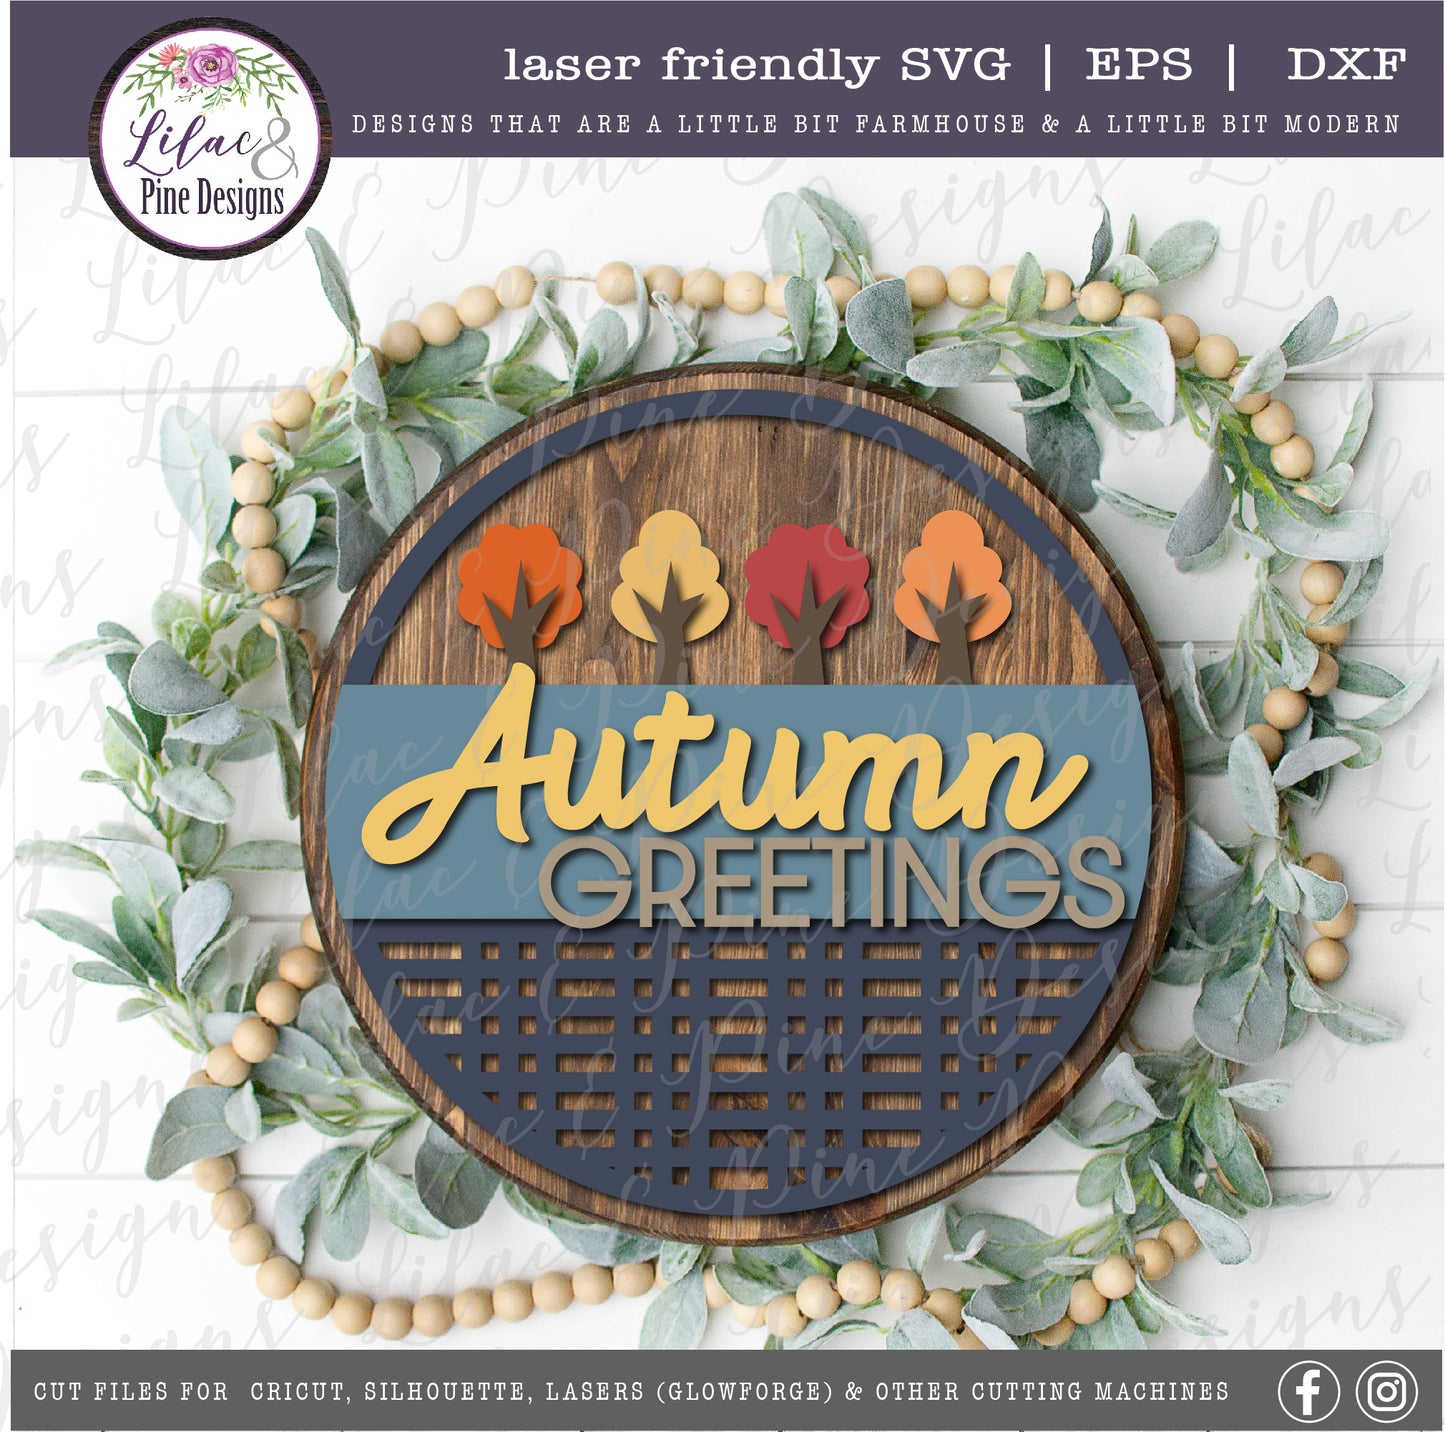 Autumn Greetings round sign SVG, fall porch decor SVG, laser cut file, Glowforge SVG